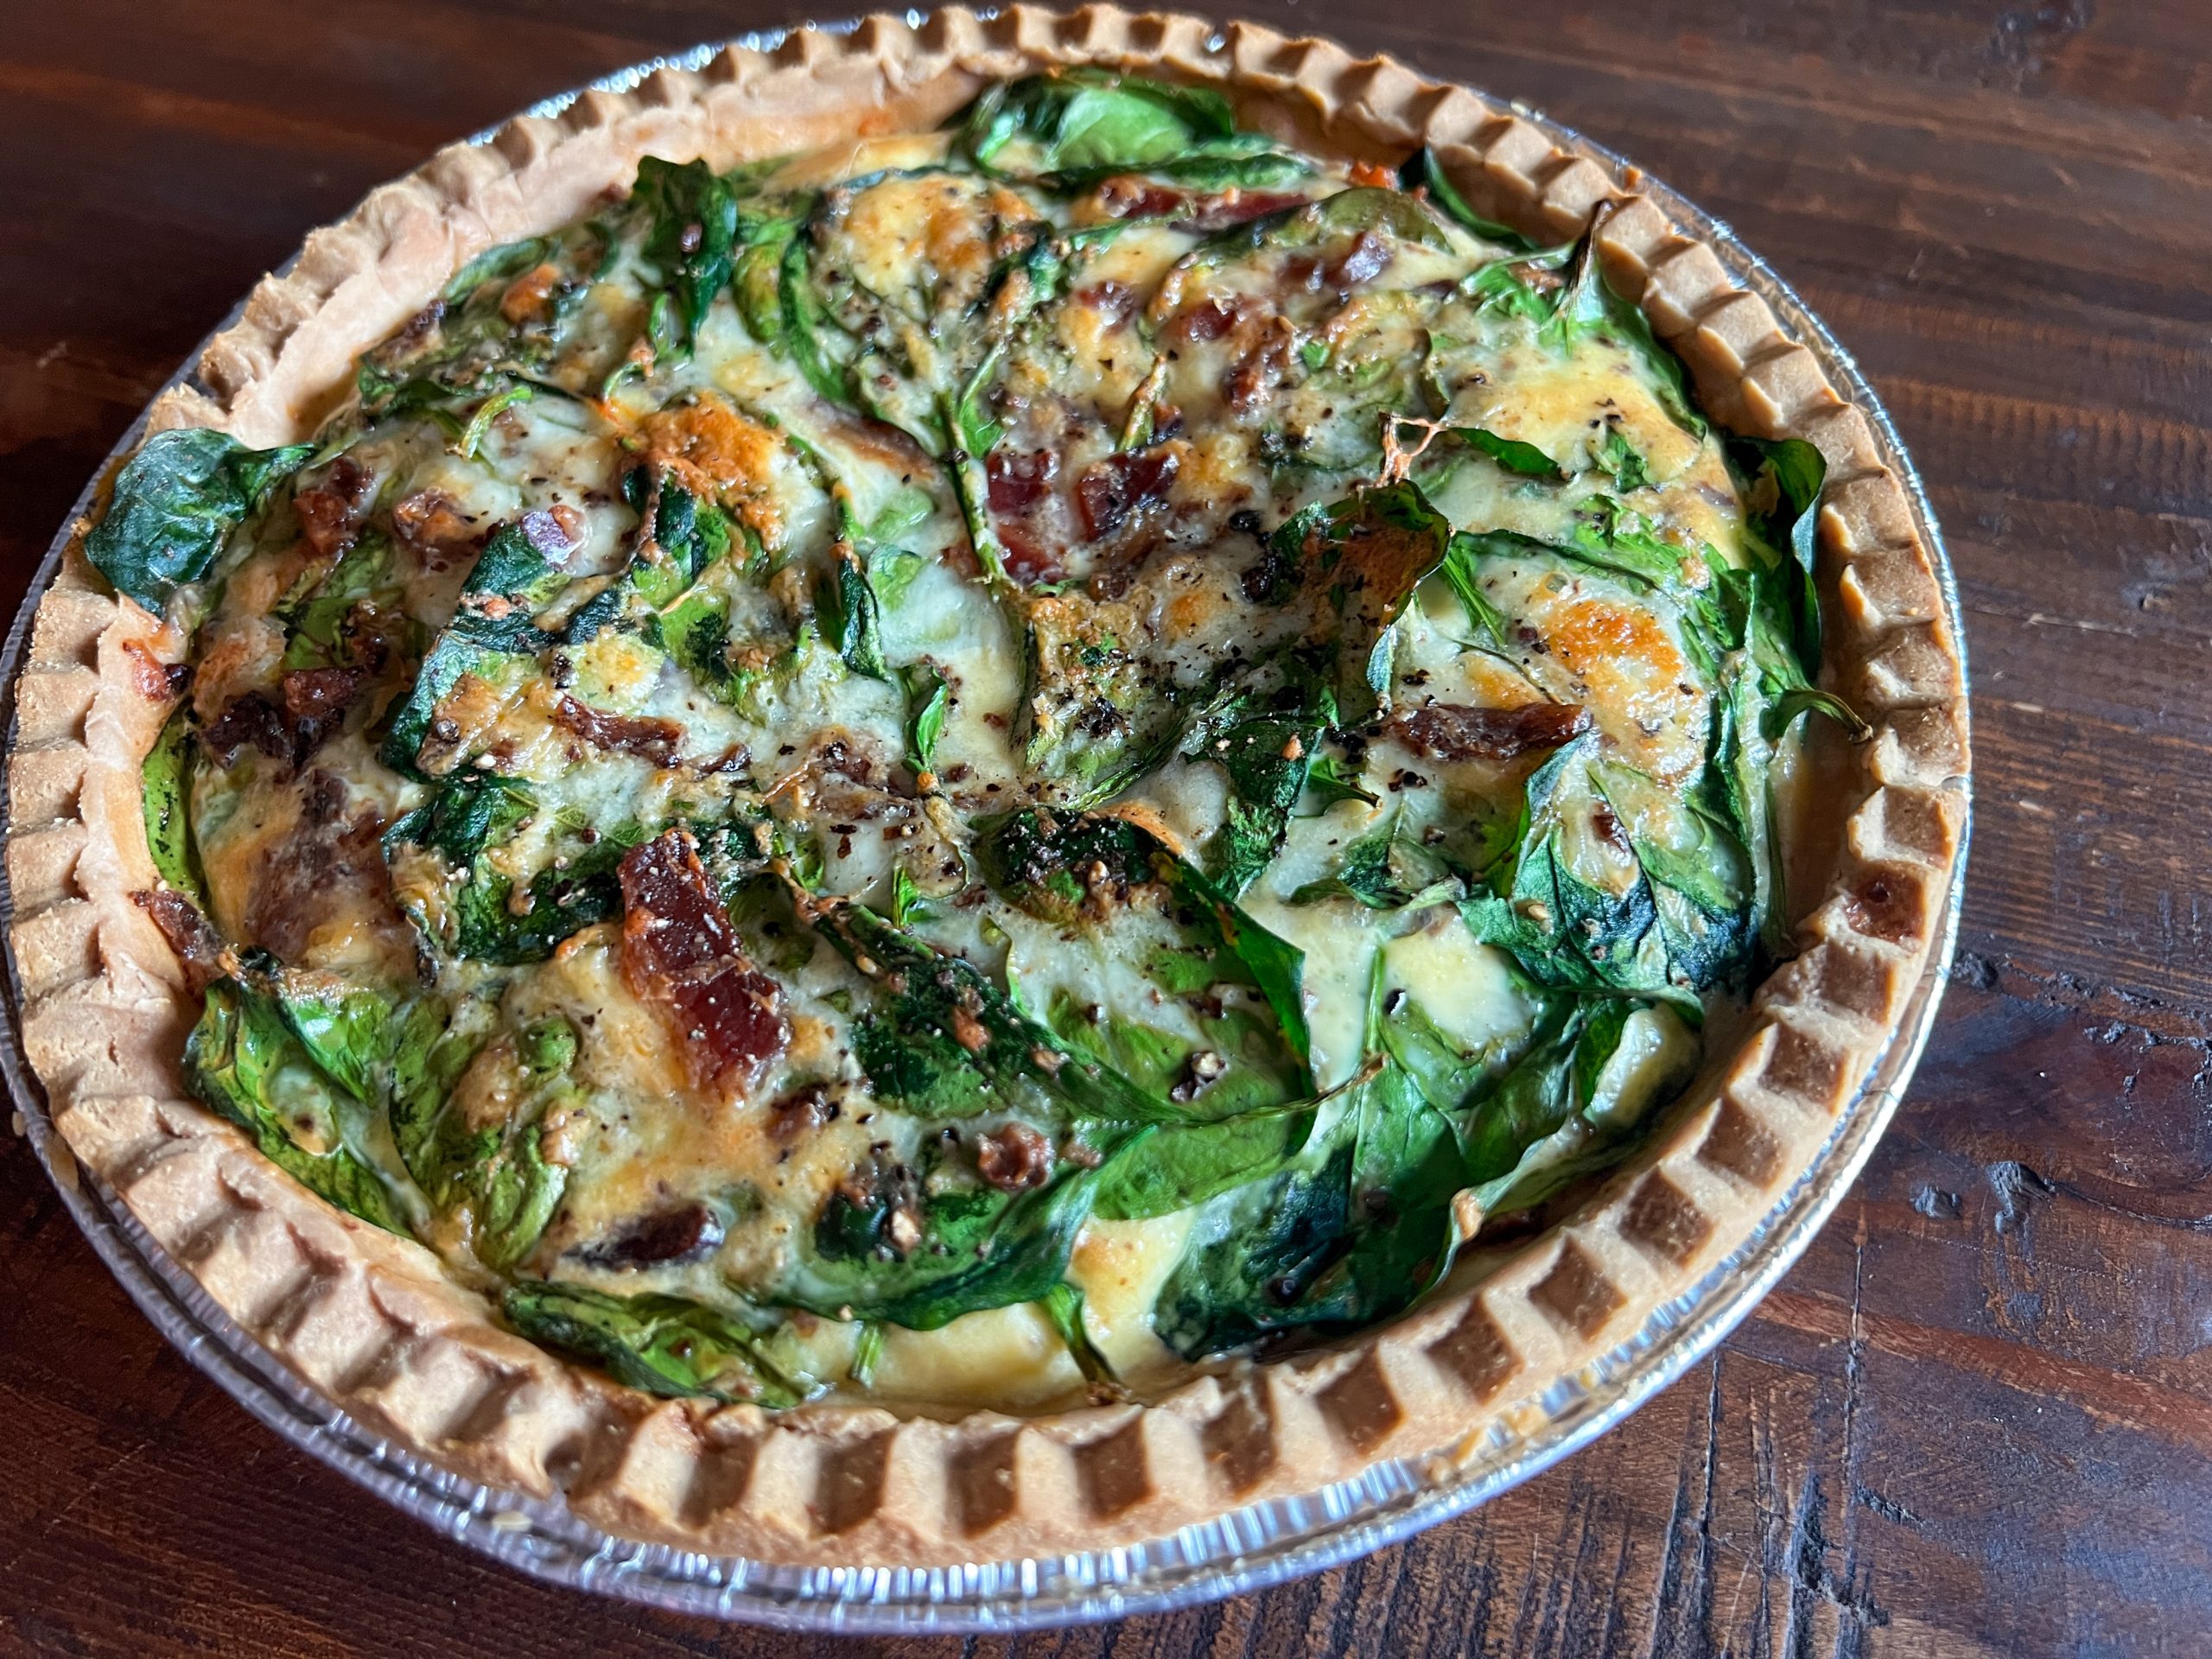 This quiche recipe is the vehicle for any kind of quiche - use any mix-in that you'd like